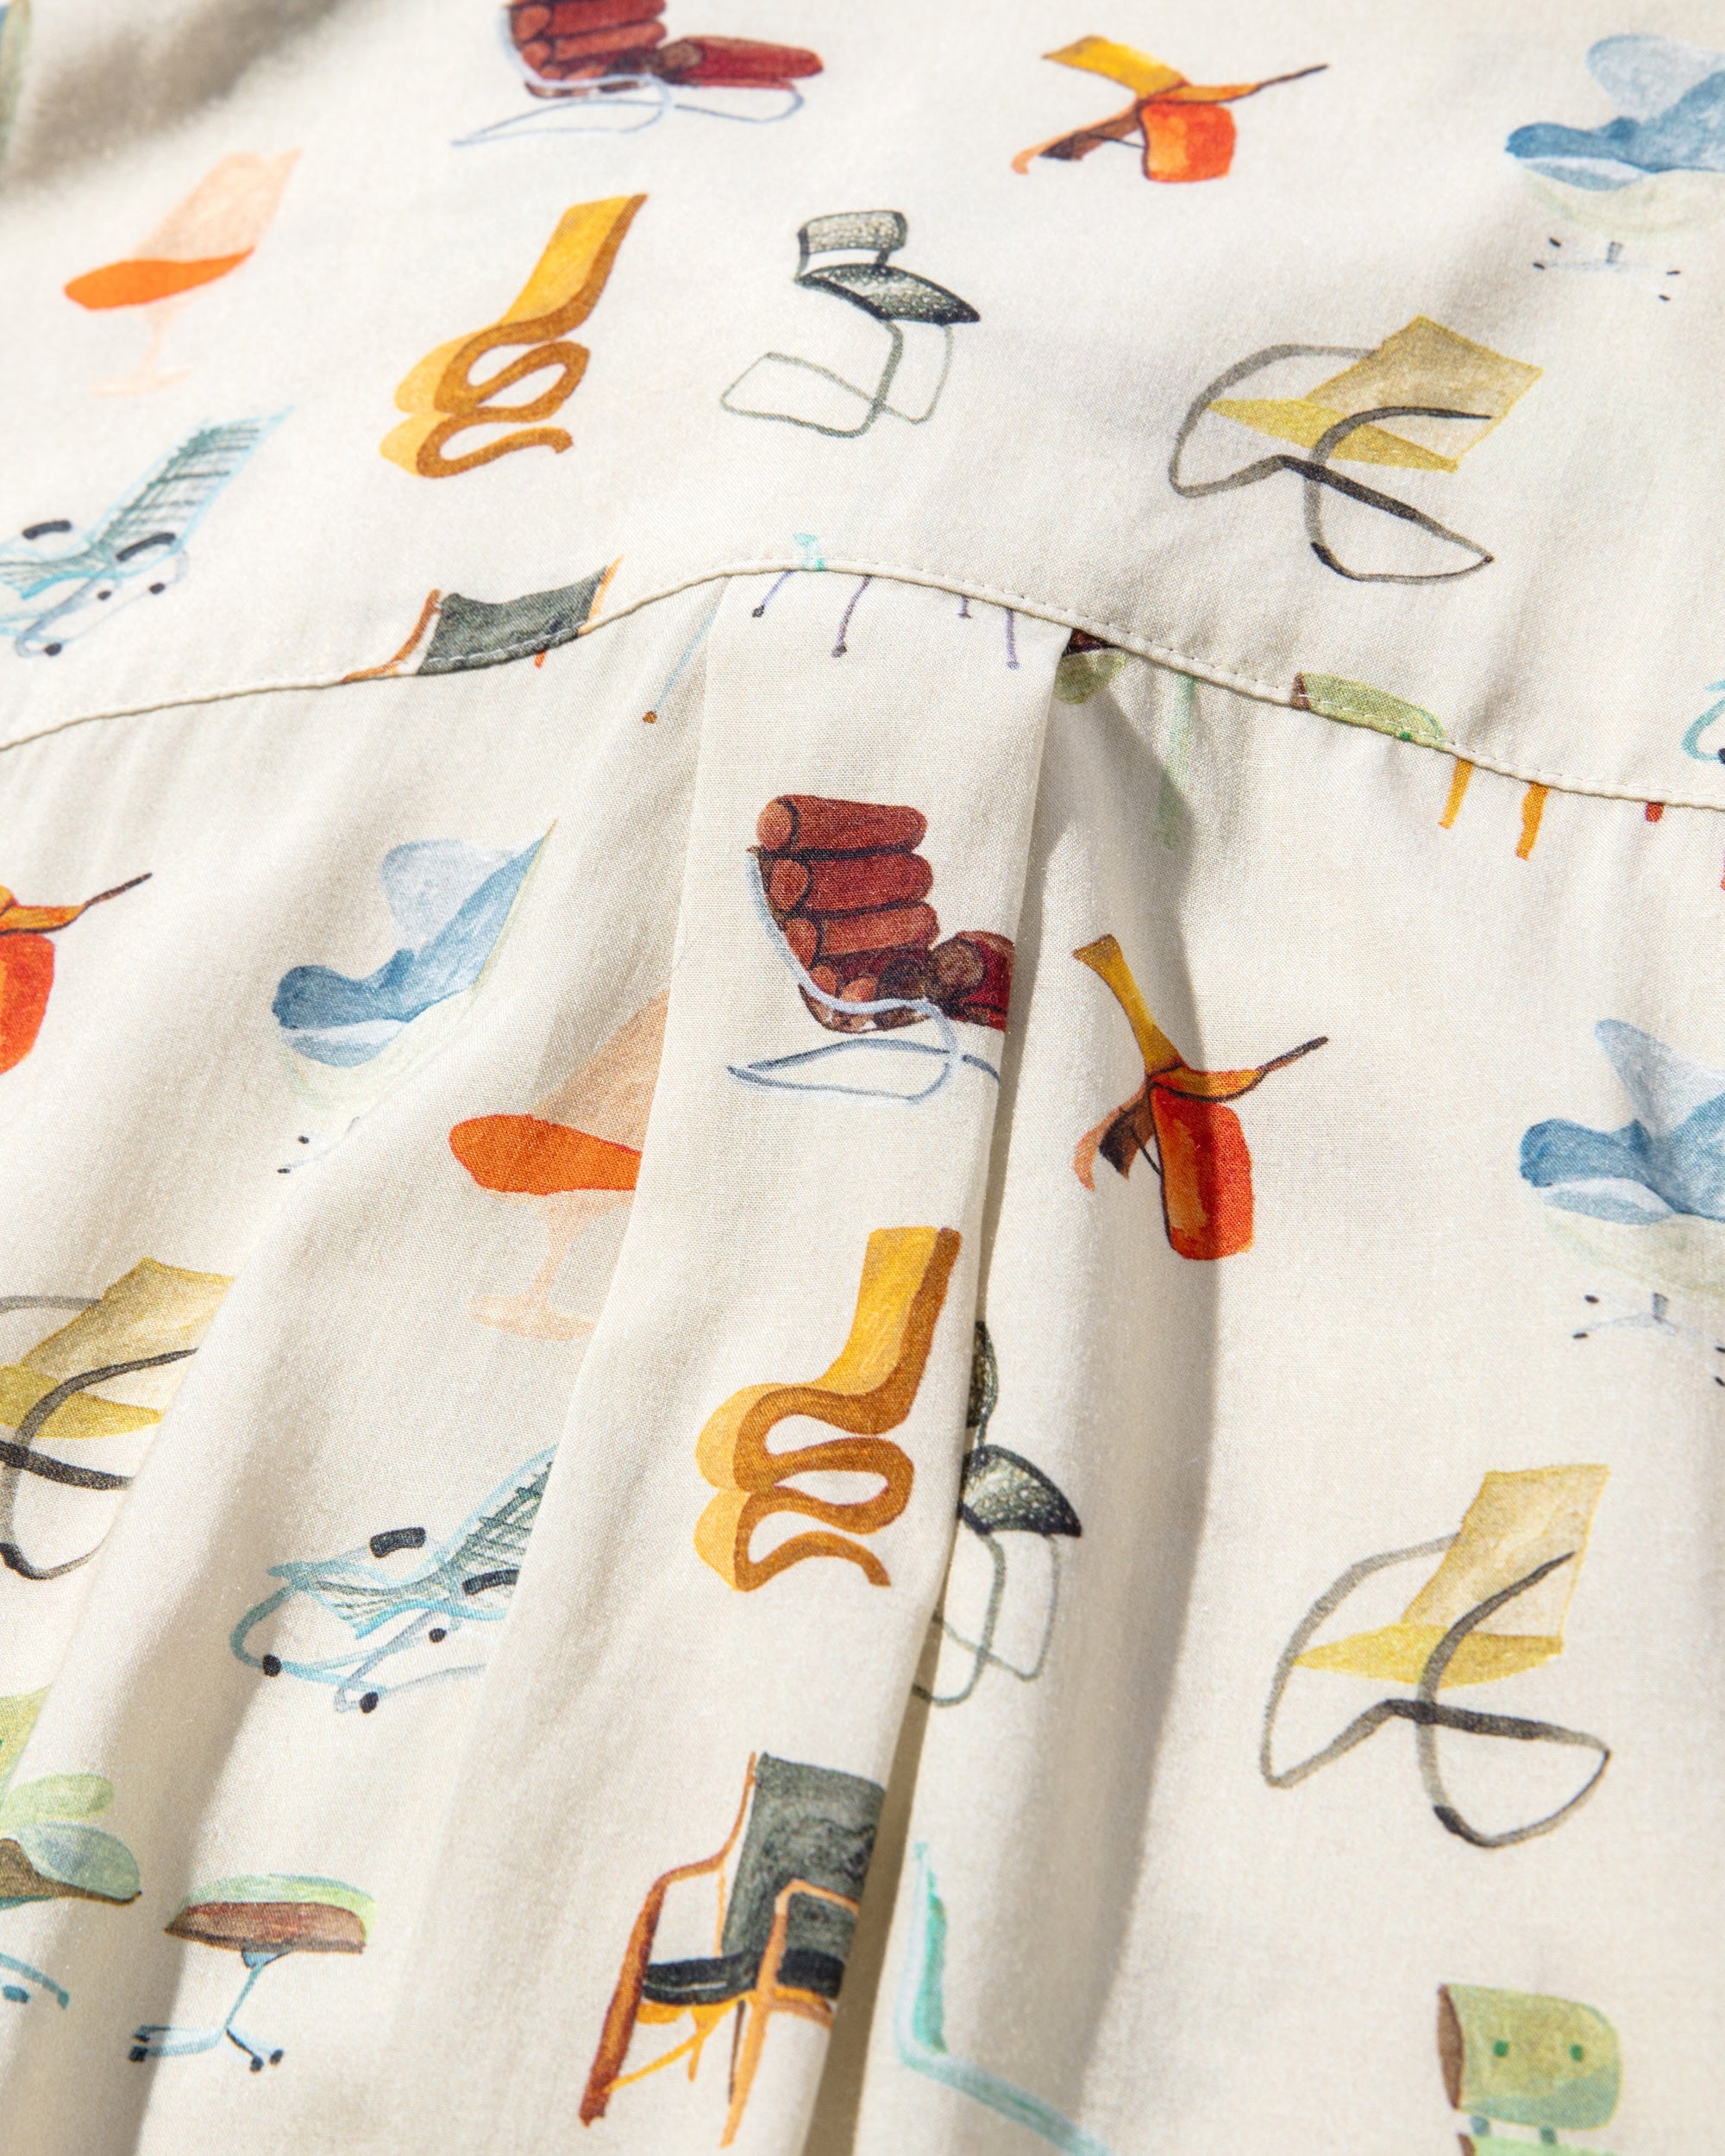 【6.15 SAT 20:00- IN STOCK】DRAWING CHAIR PATTERN CITY S/S SHIRTS WITH KARIN MEENEN